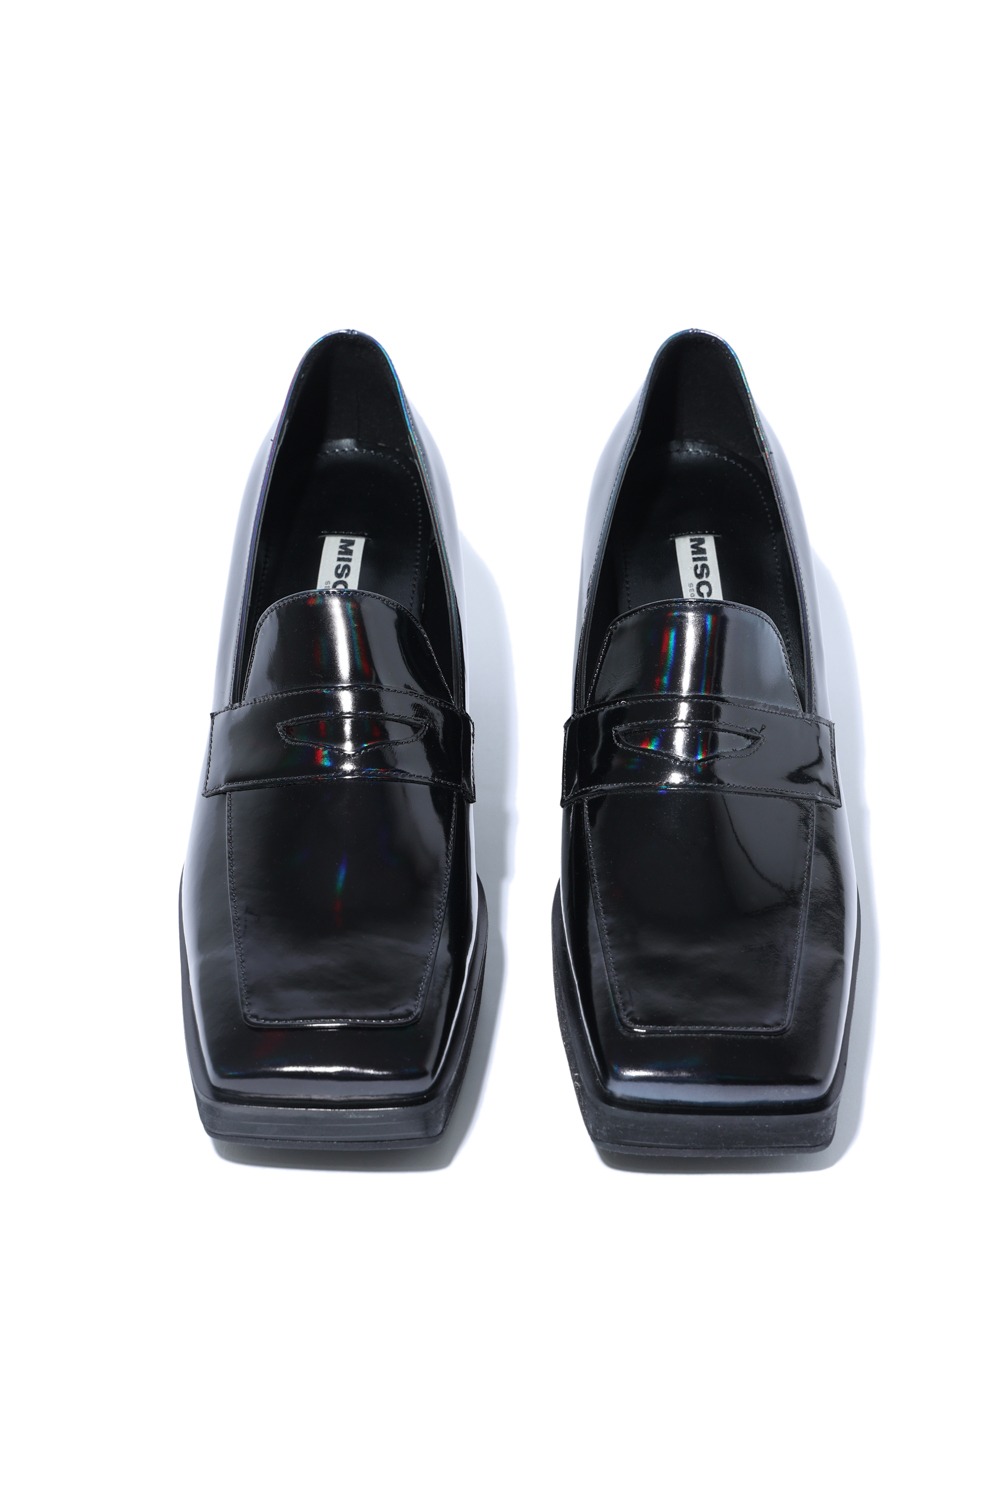 REVERSE REBIRTH 2021 HOLOGRAPHIC PENNY LOAFER_BLACK